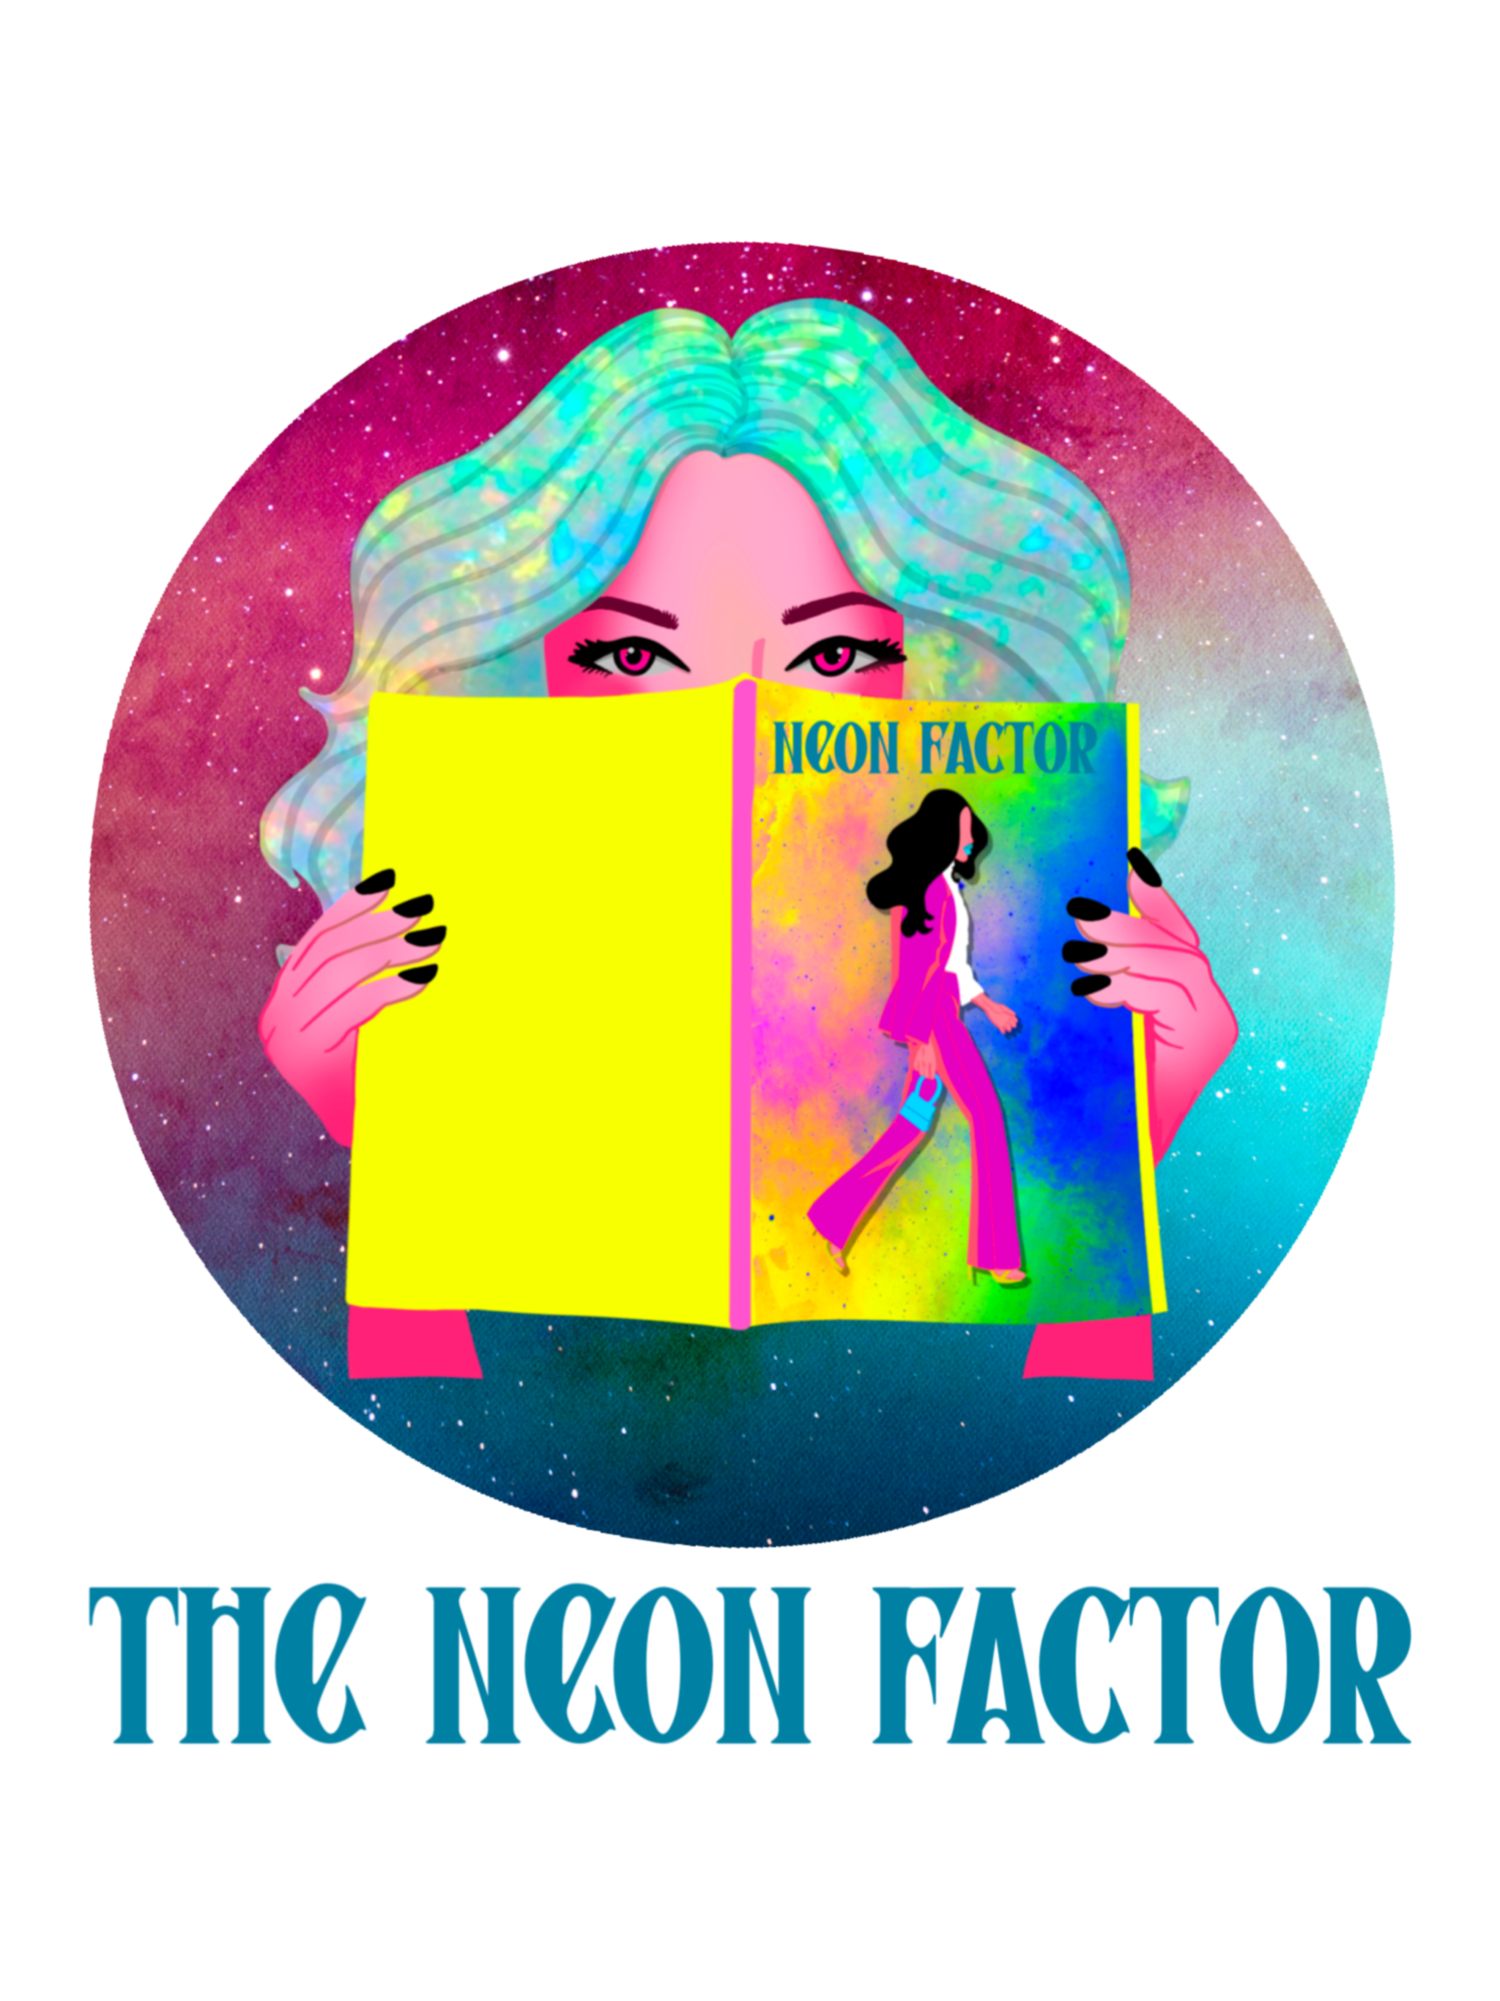 The Neon Factor : Fashion and Style Website